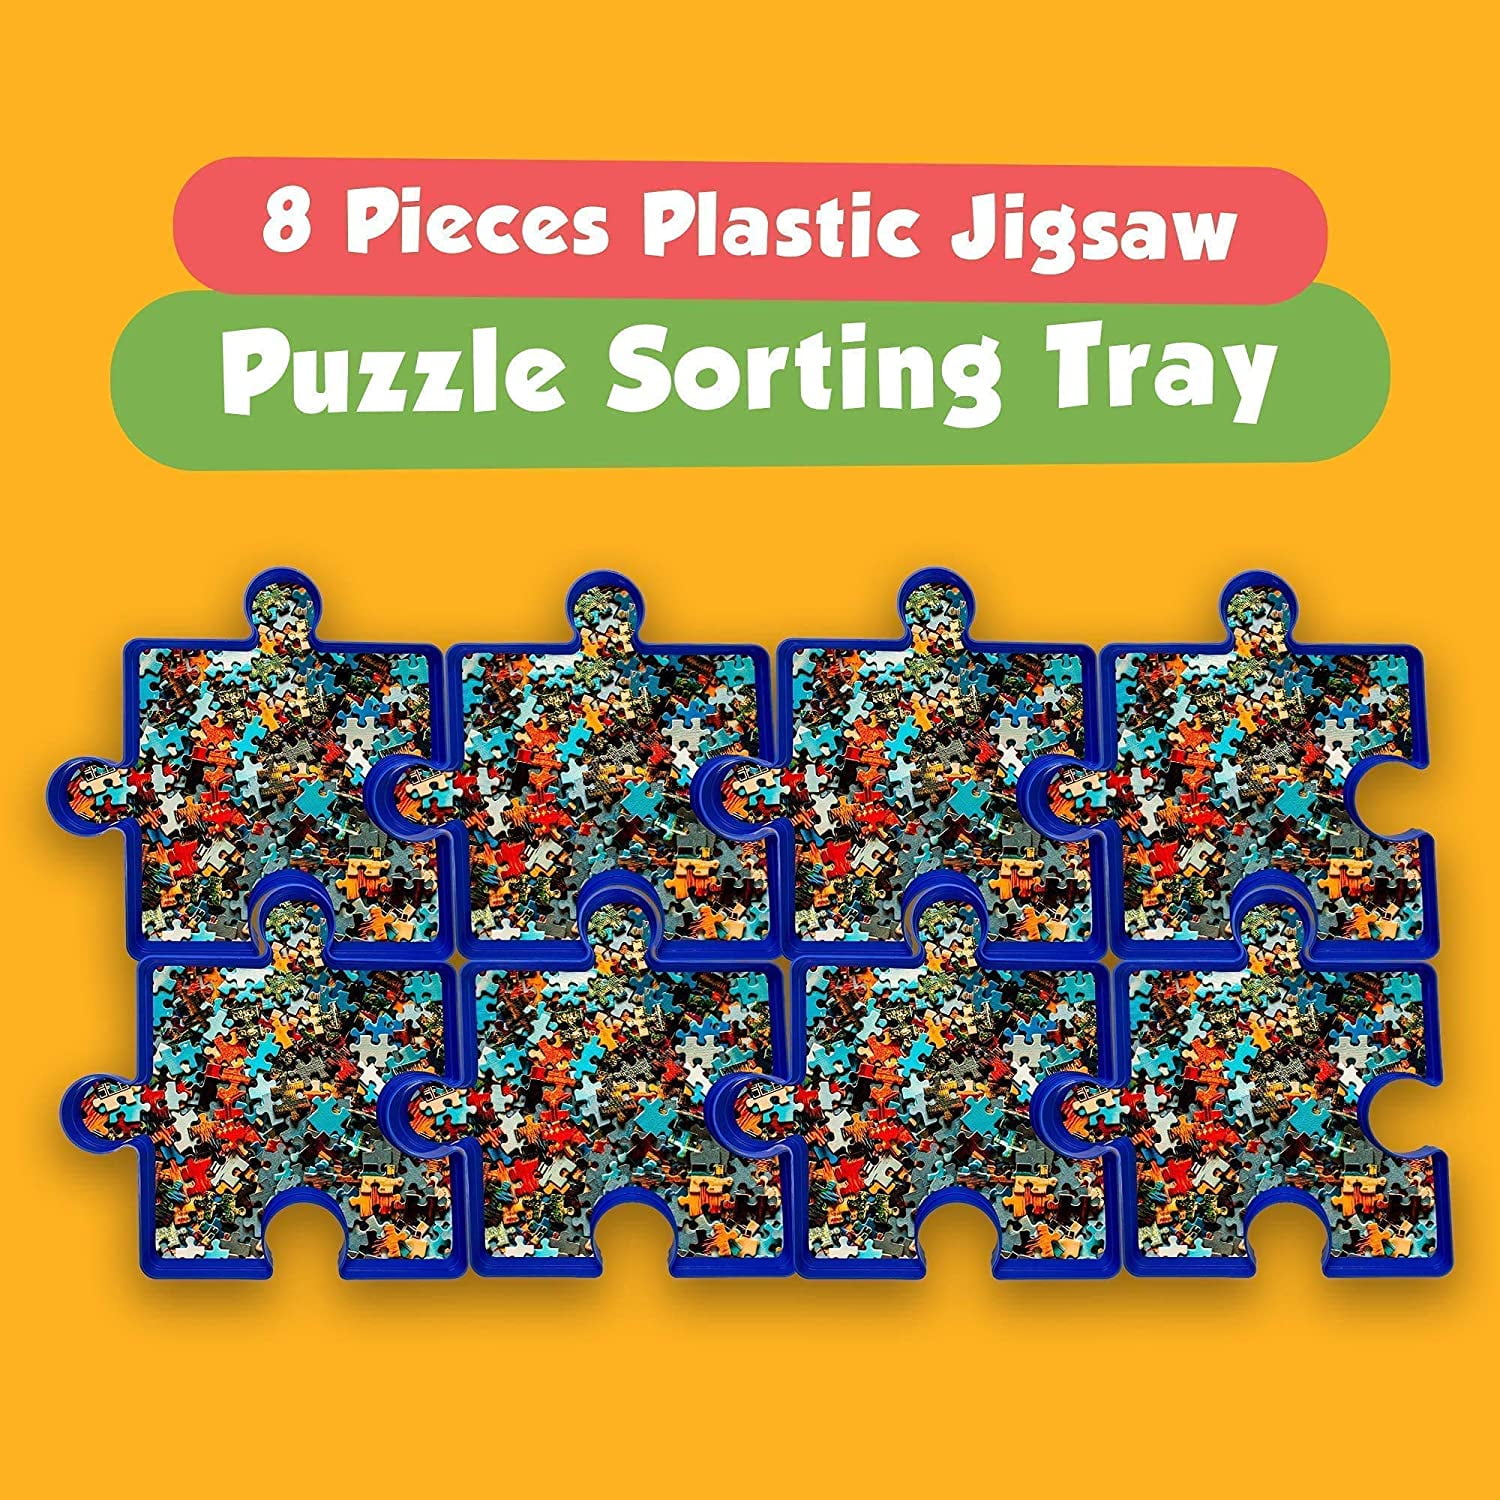 Toynk Jigsaw Puzzle Stackable Sorting Trays | Set of 6